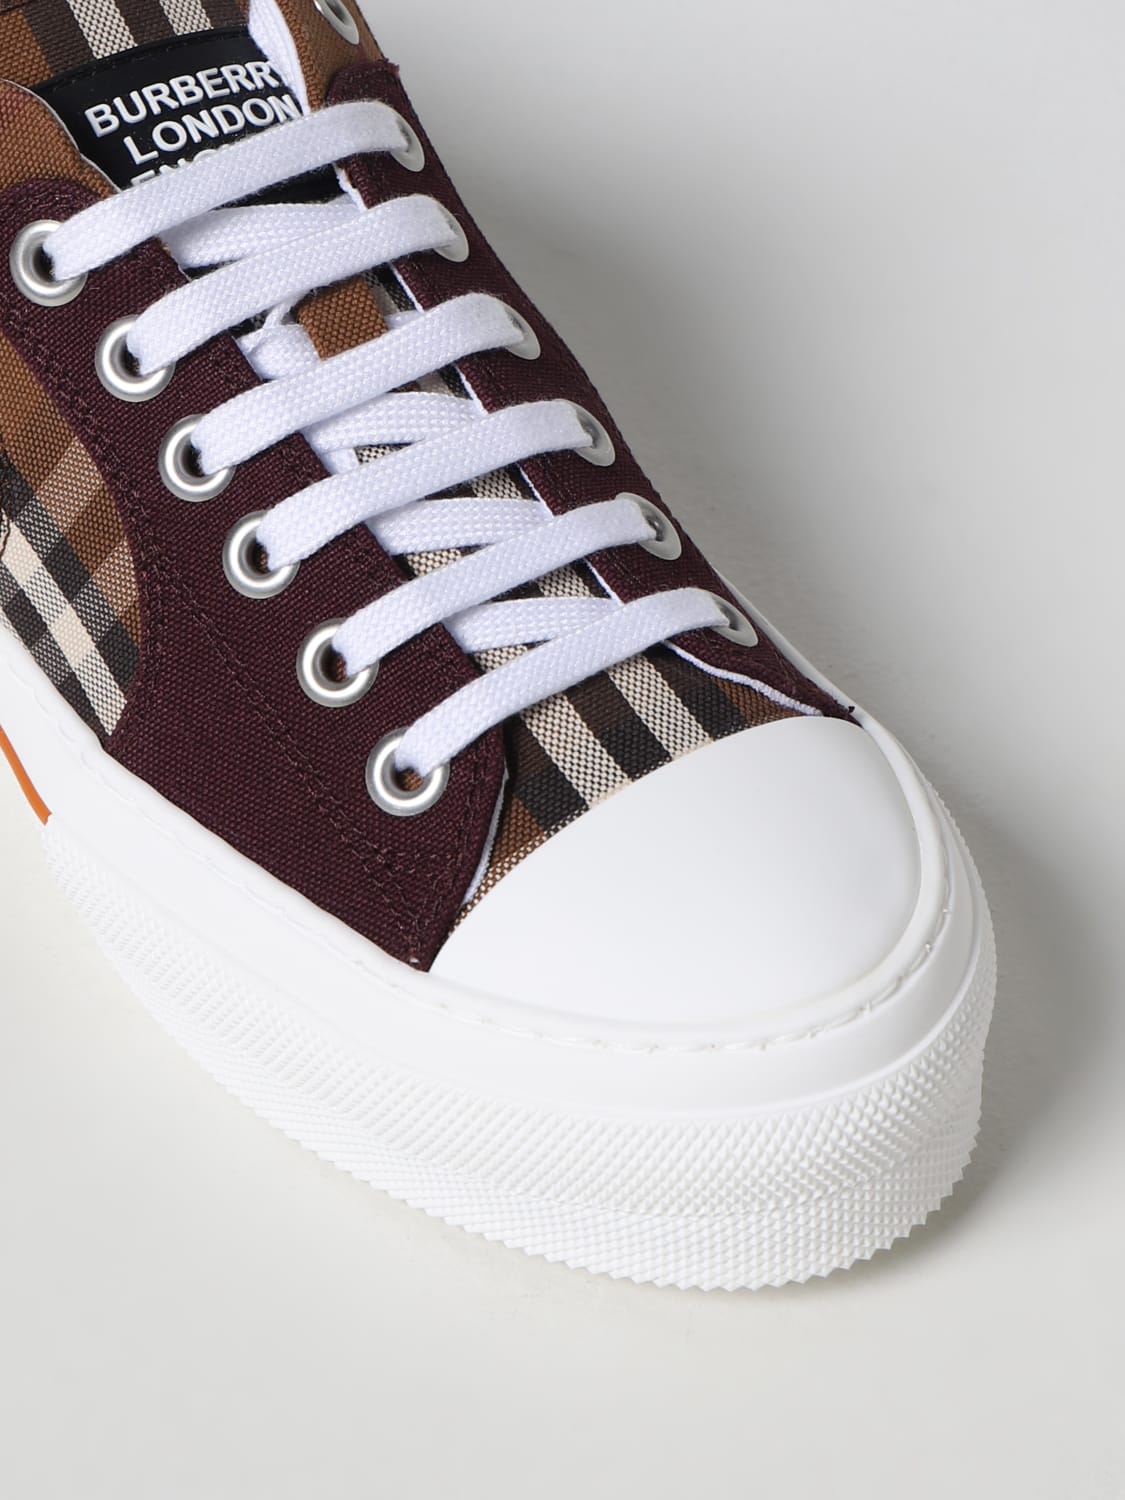 BURBERRY: Sneakers | Burberry sneakers 8064266 online on GIGLIO.COM